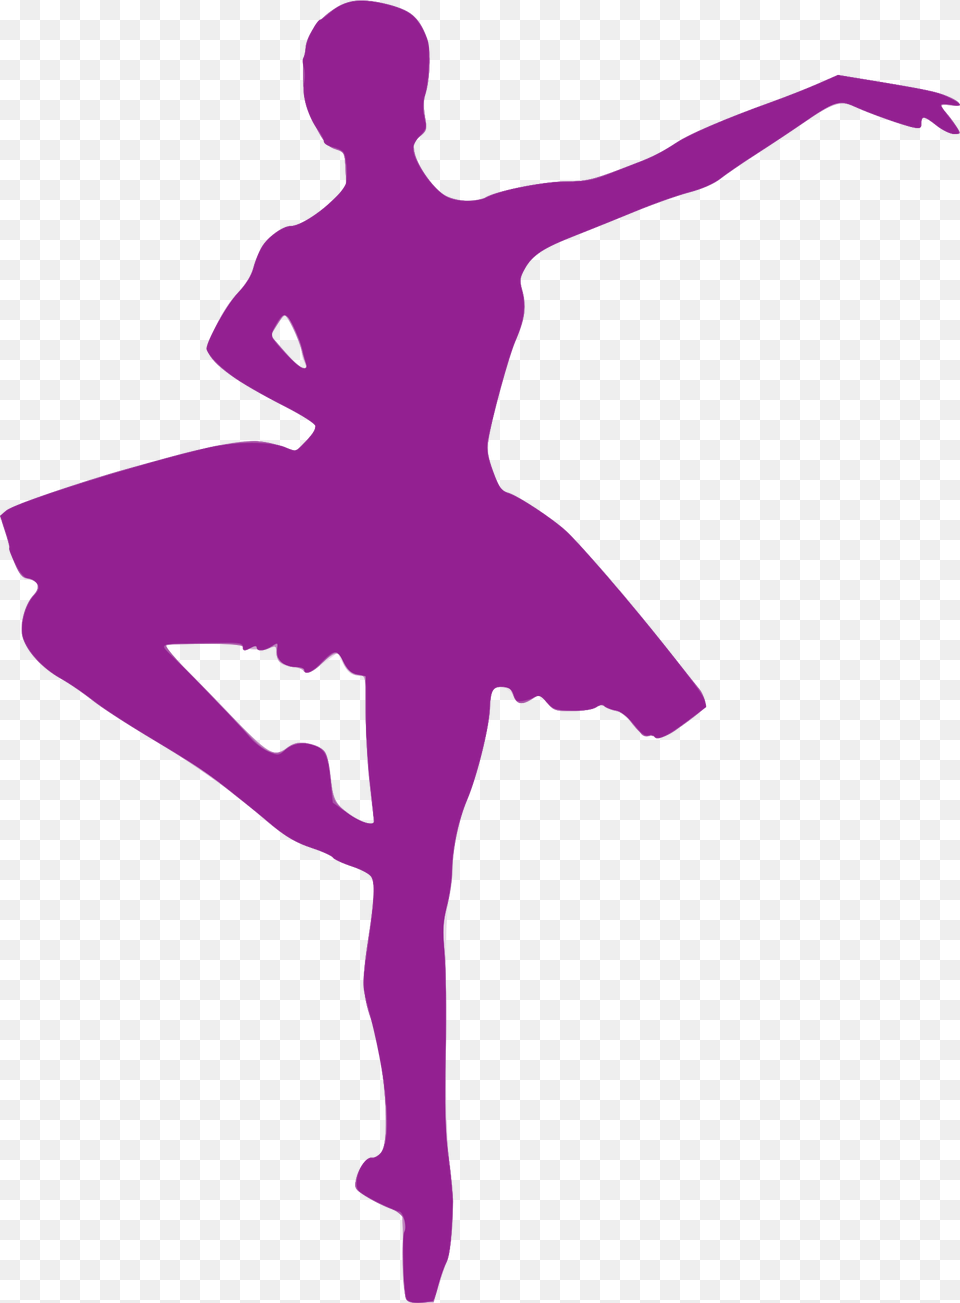 This Icons Design Of Silhouette Danse, Ballerina, Ballet, Dancing, Leisure Activities Png Image